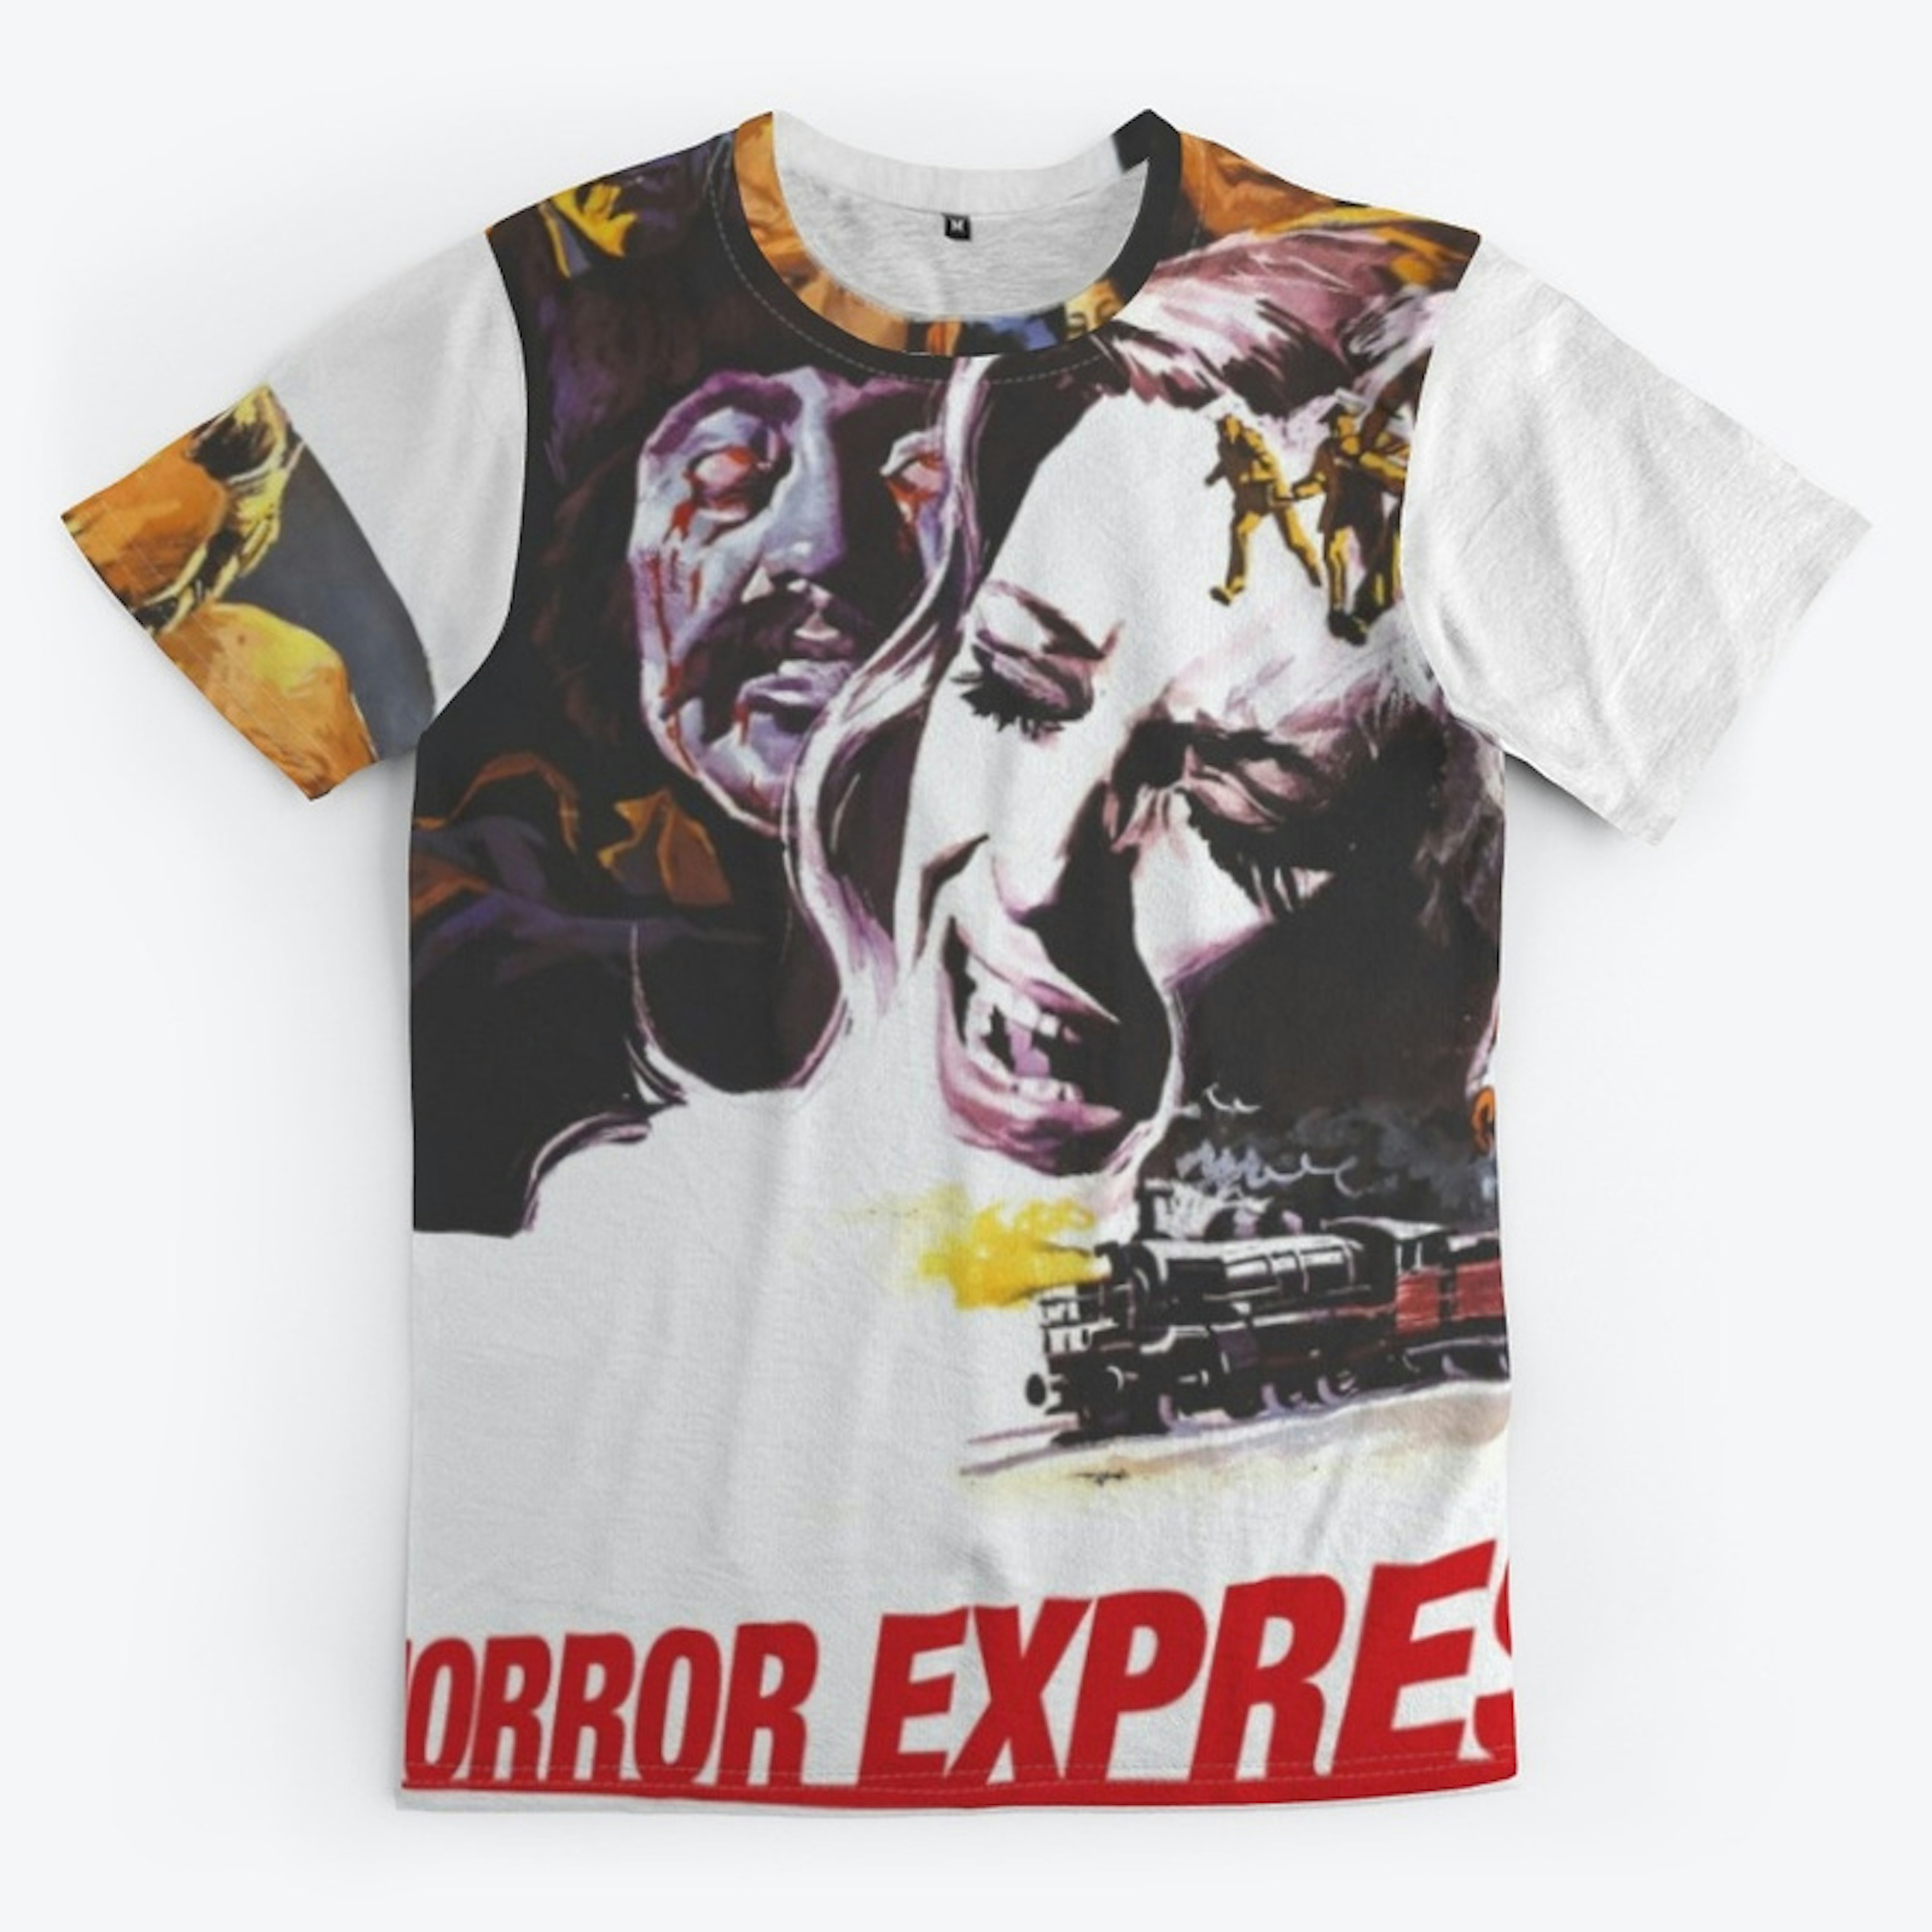 Horror Express Style 2